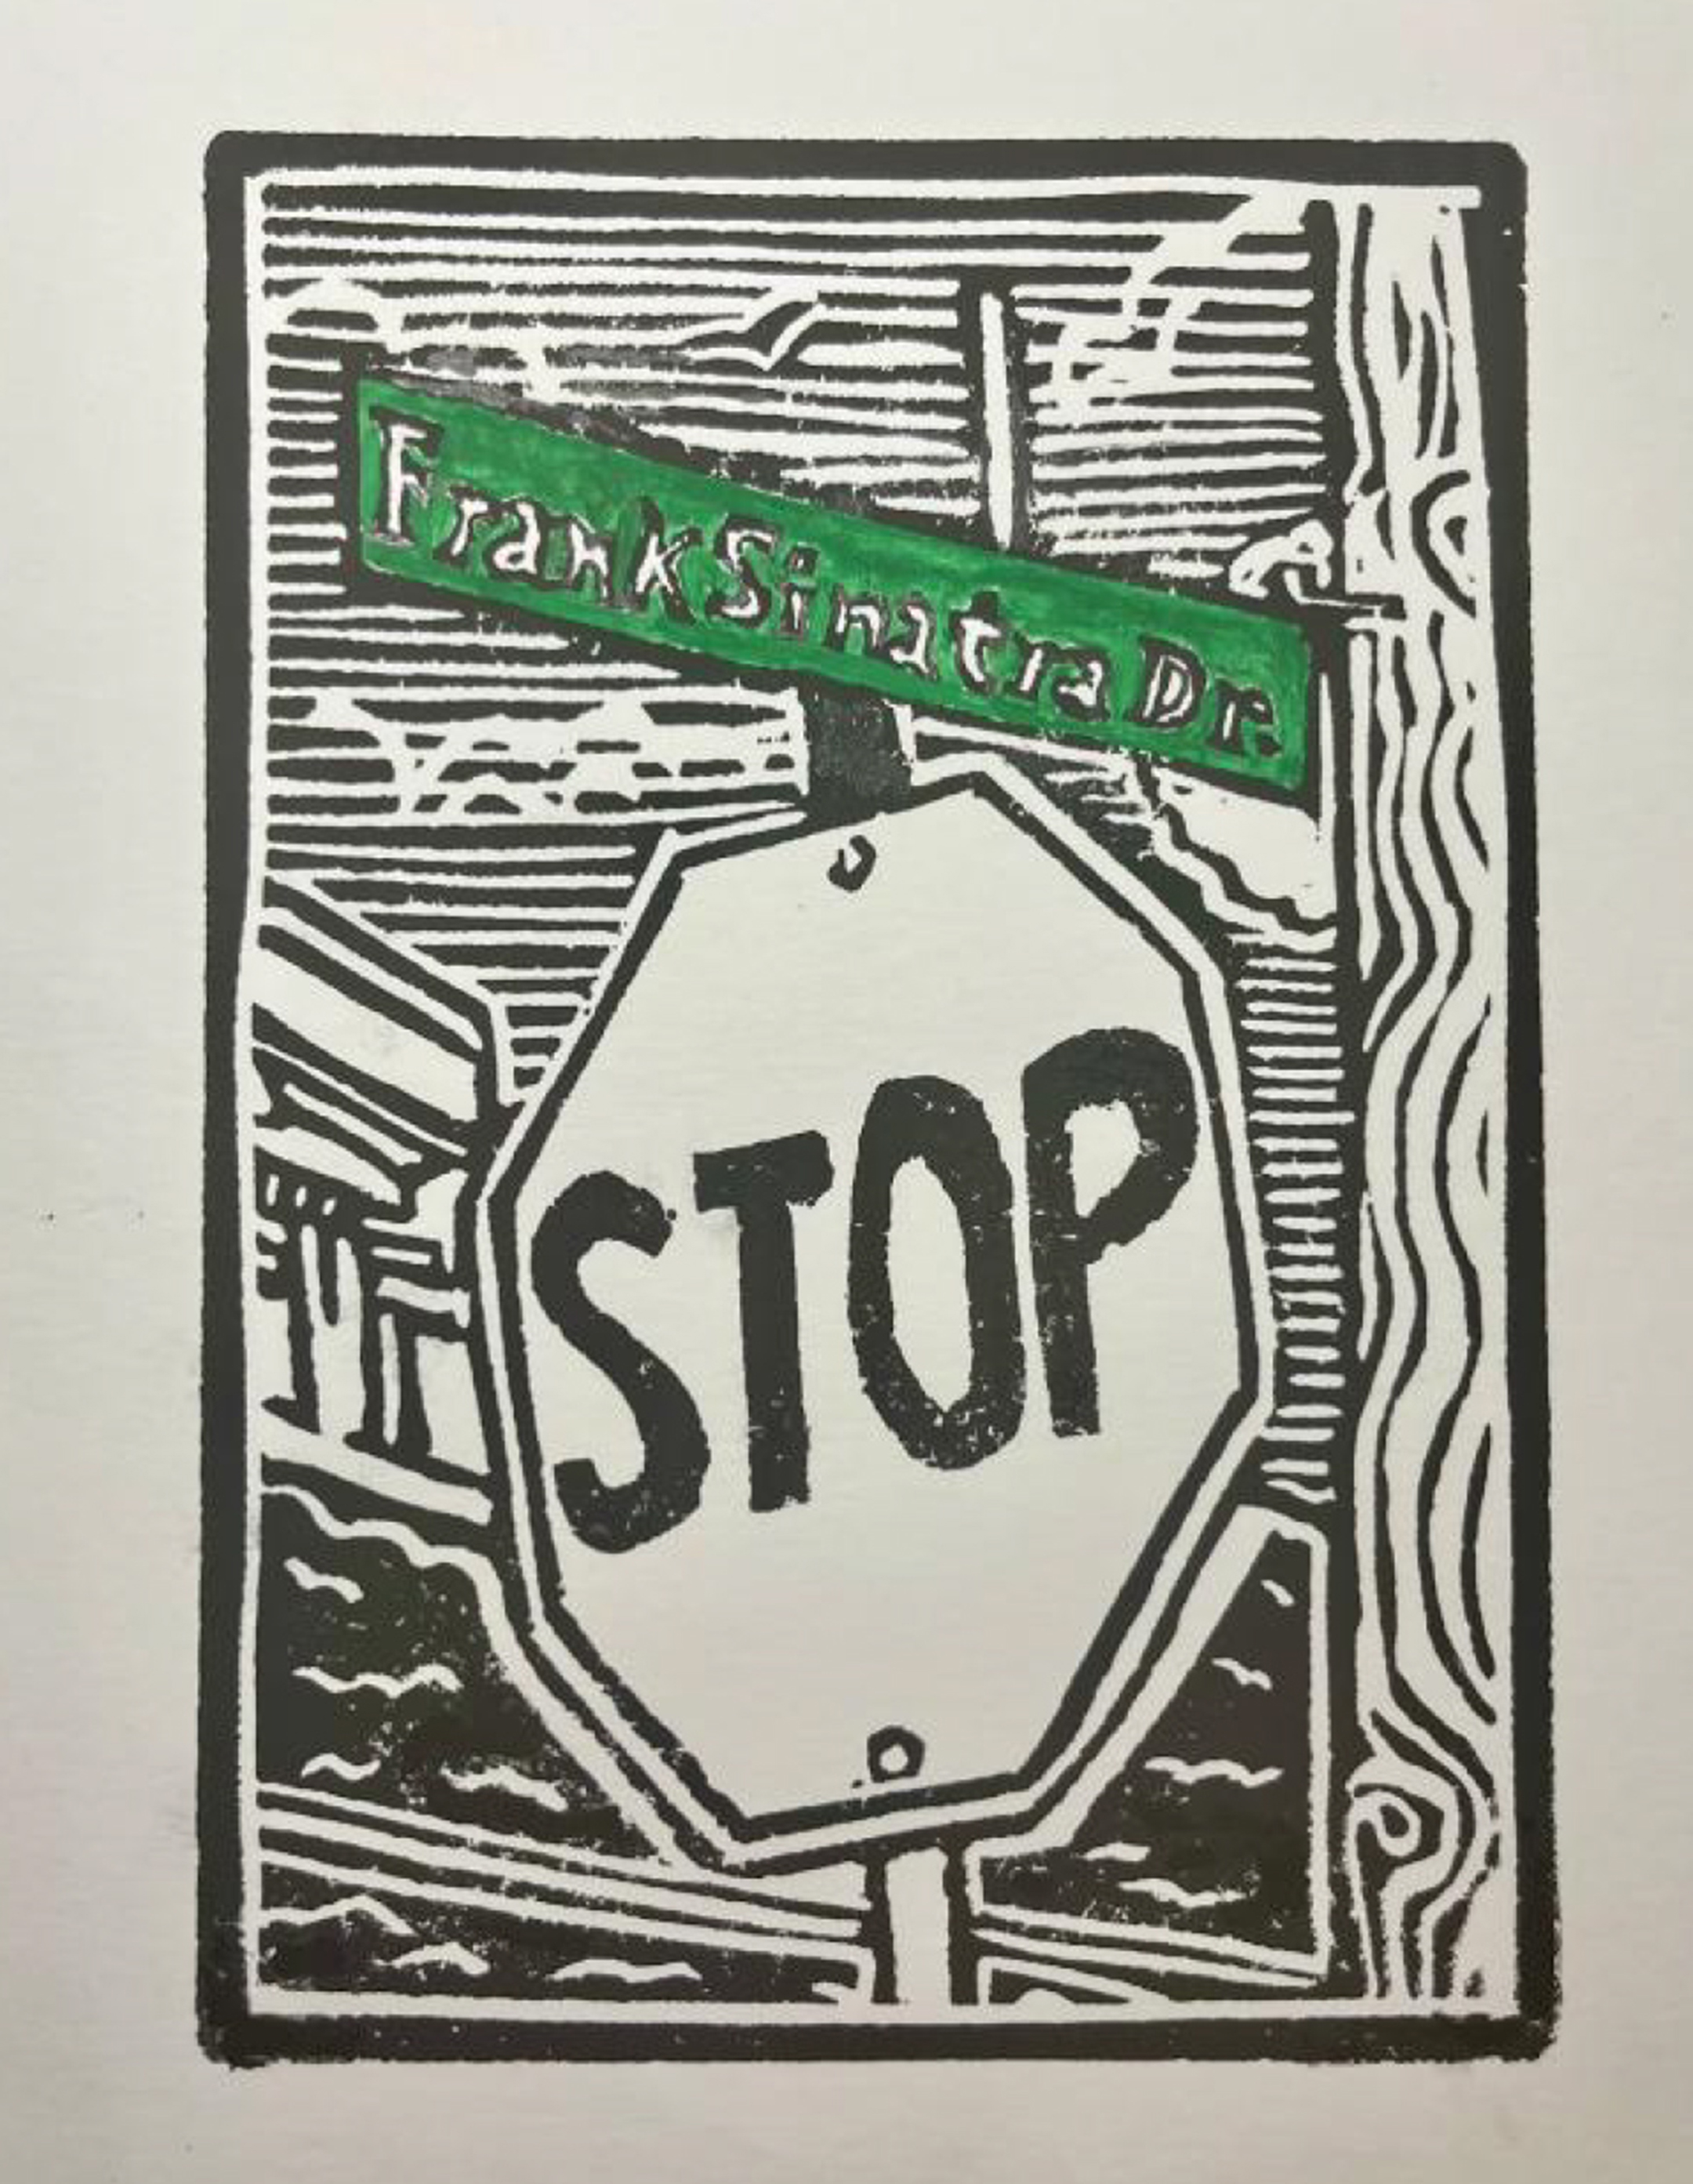 Black and white wood block print of a stop sign with a green street sign above it reading Frank Sinatra Blvd.